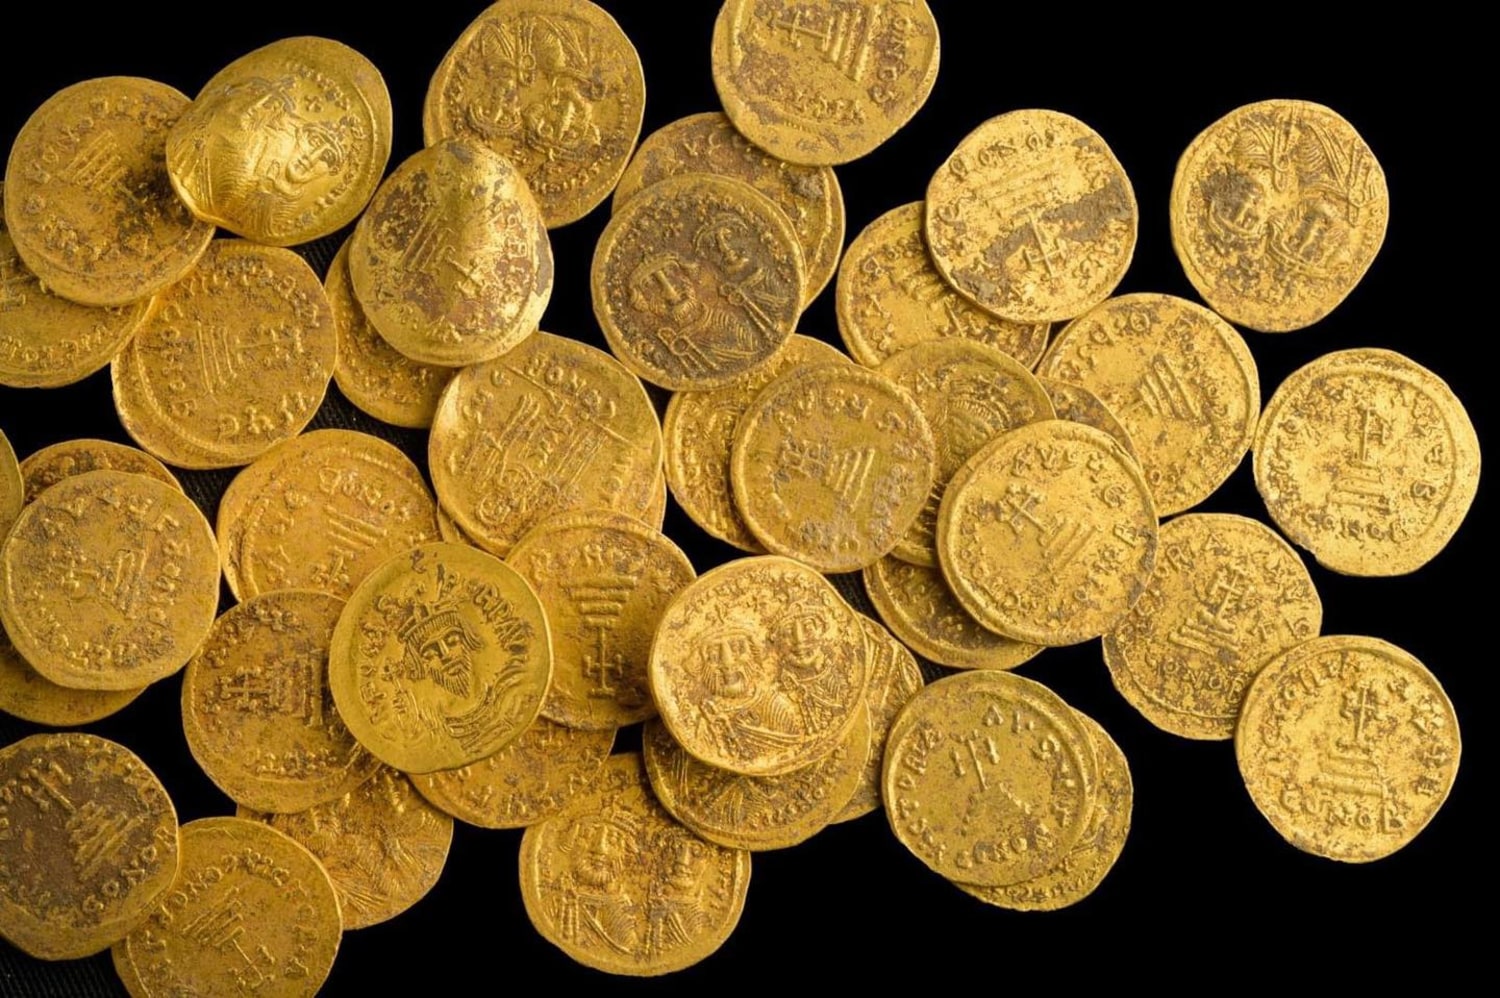 GOLD COINS - As Seen On TV